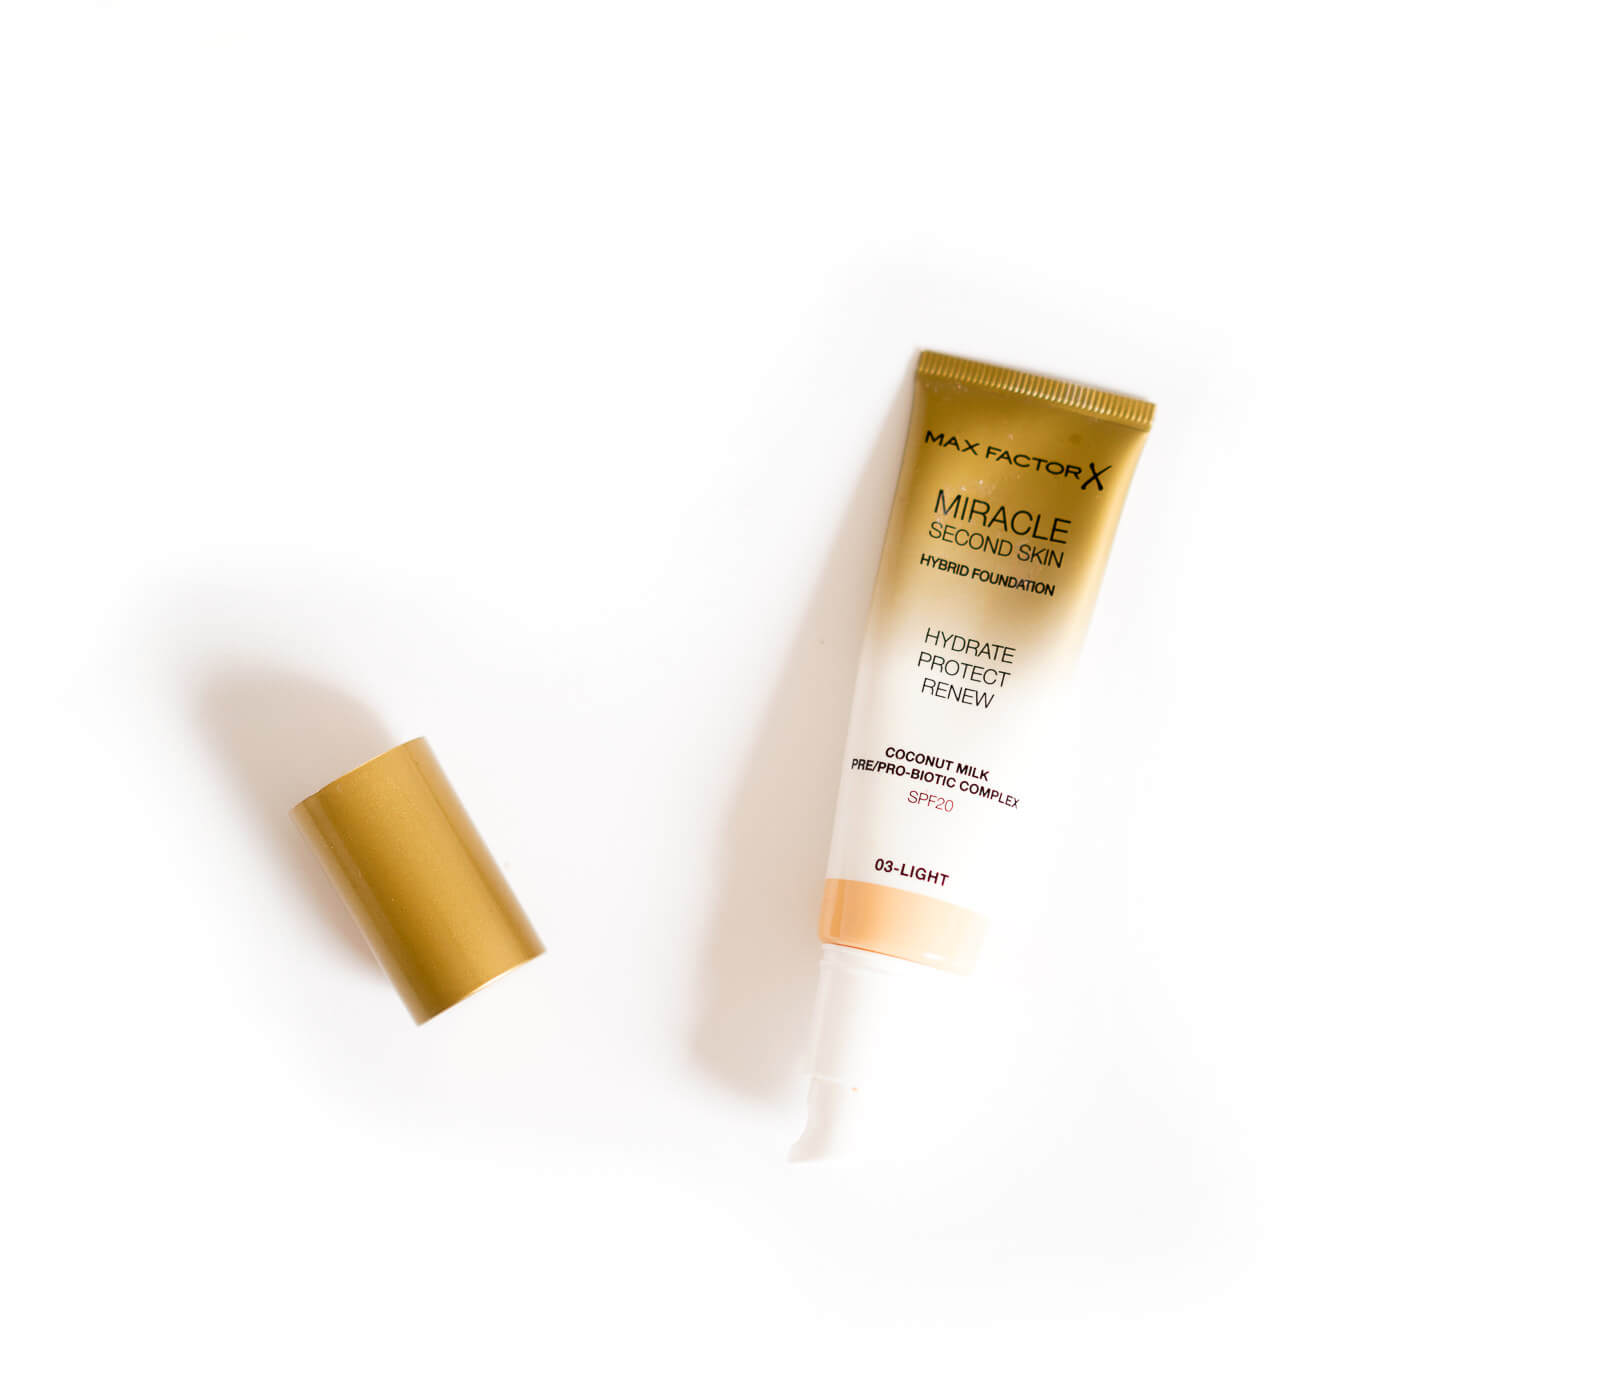 Review - Max Factor Miracle Second Skin Foundation im Test 4